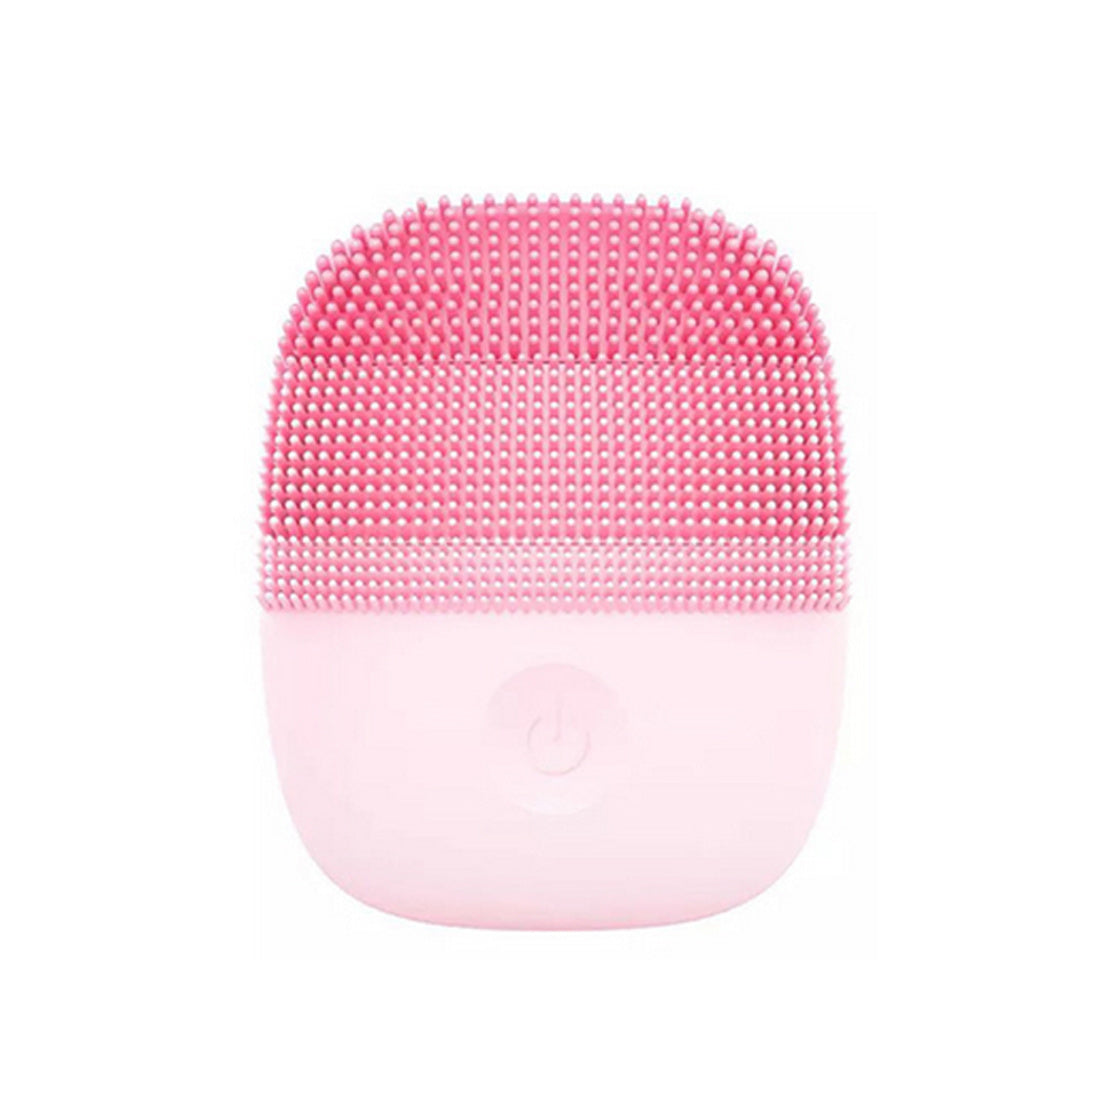 Inface mini Sonic Facial Device Pink